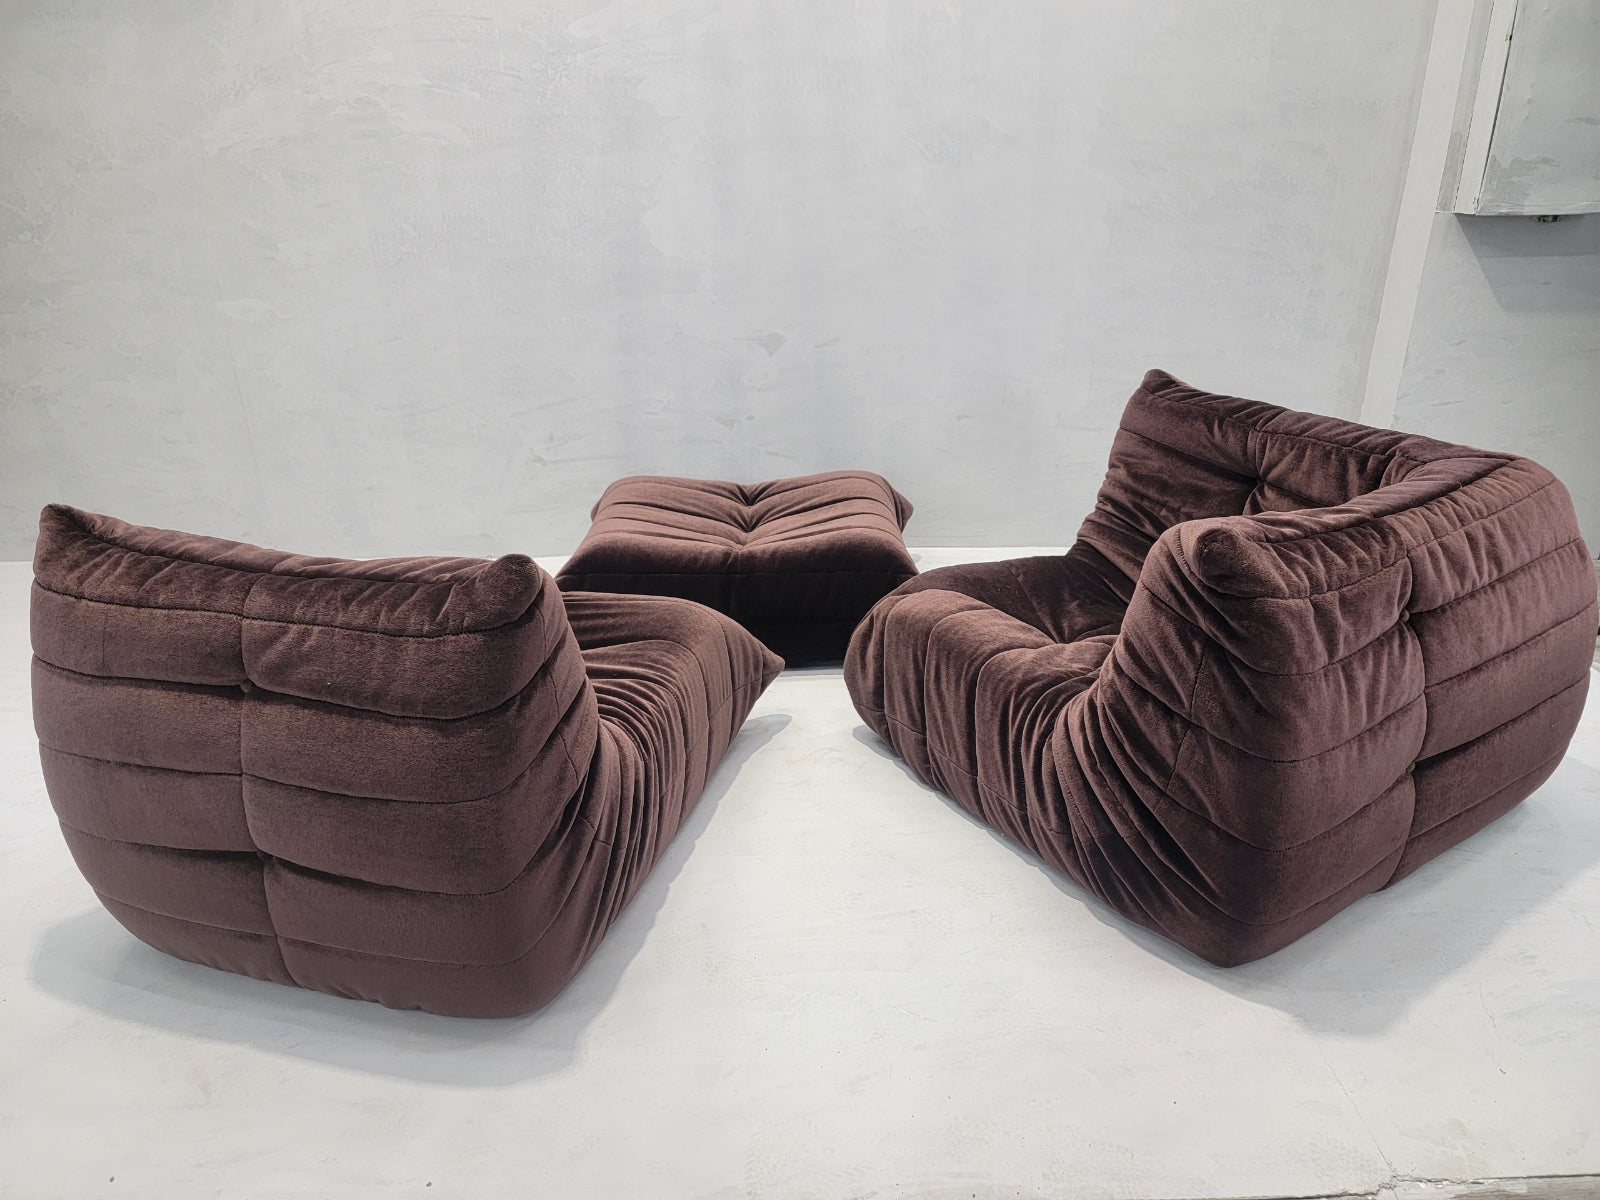 Mid Century Modern Togo Modular Sofa Set by Michel Ducaroy for Ligne Roset Newly Upholstered in Purple Mohair - 3 Piece Set